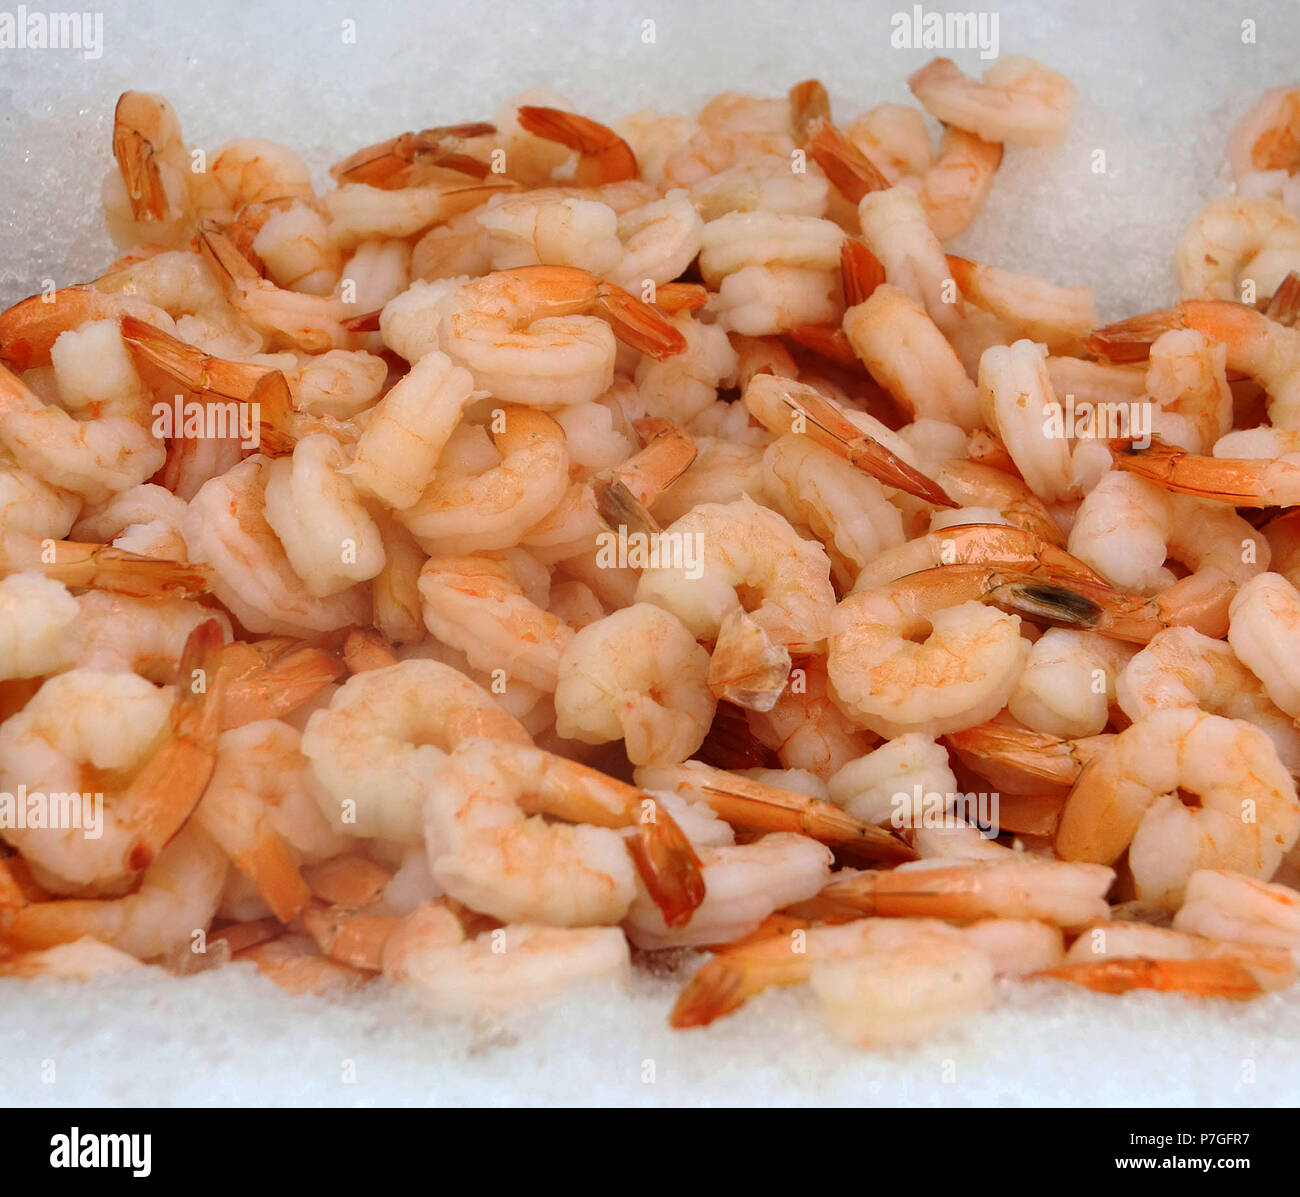 Cooked farmed shrimp on ice Stock Photo